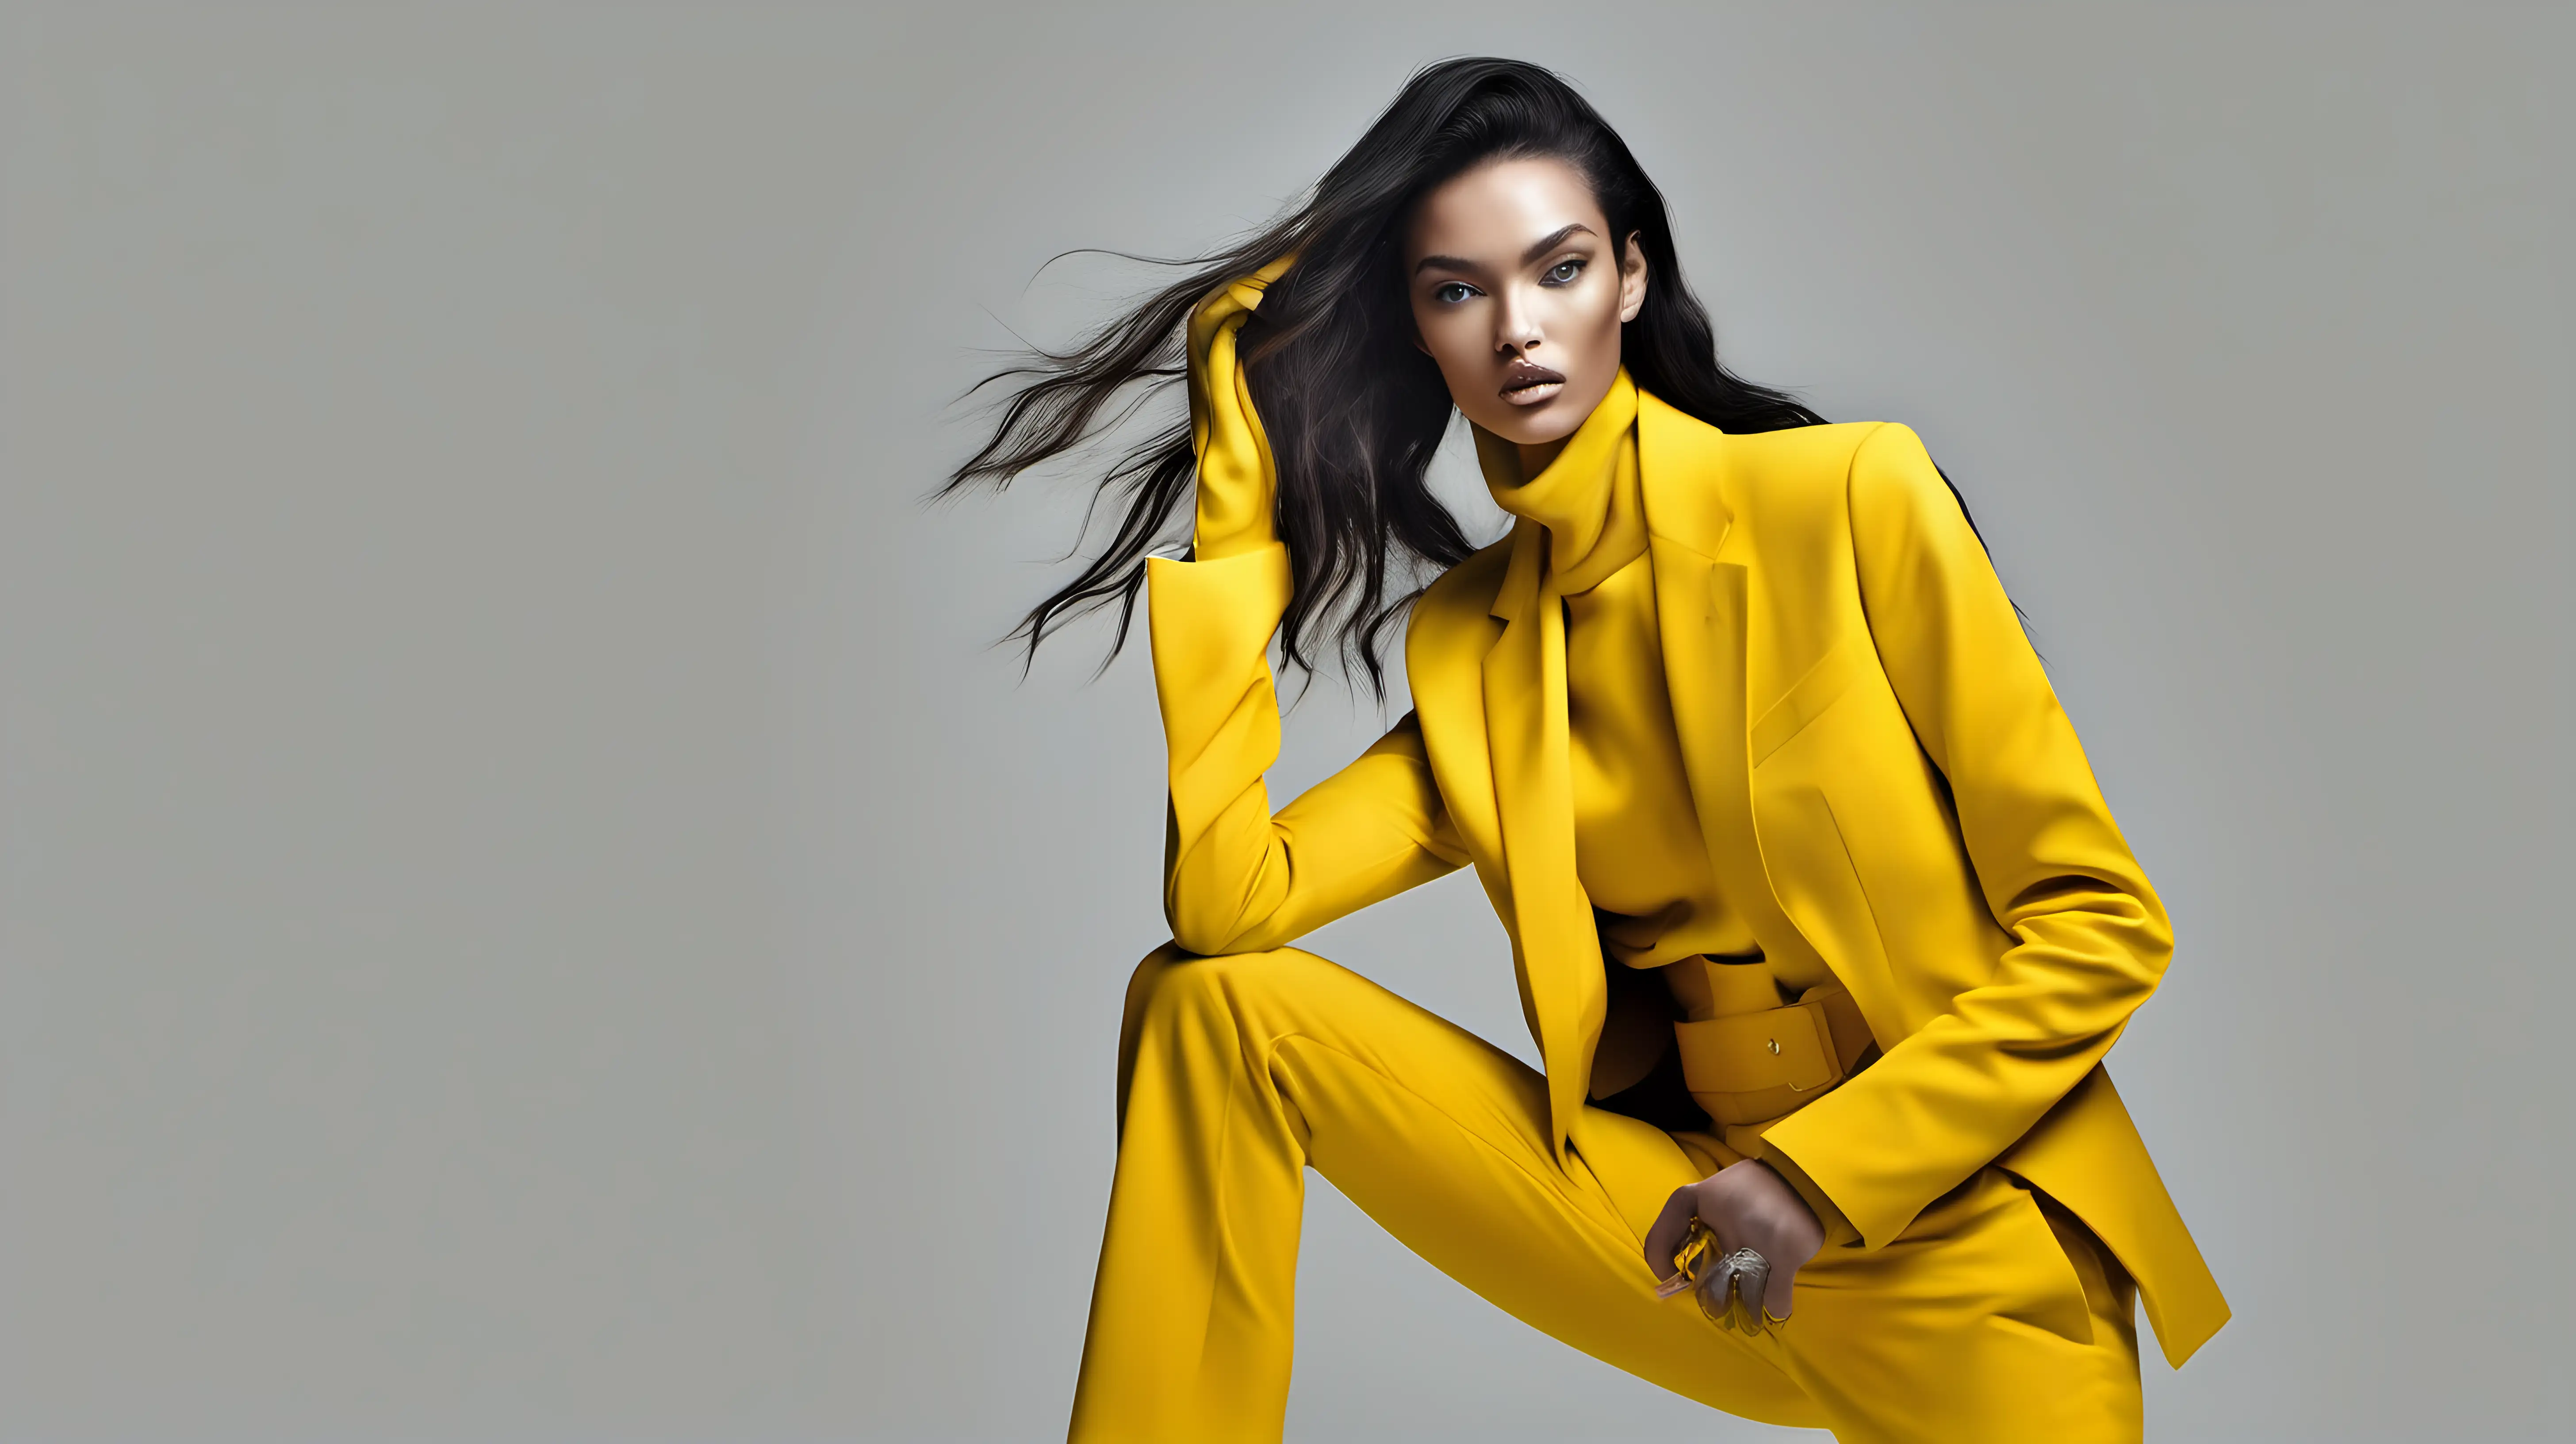 "Explore the contrast of a model in a bold yellow outfit against a stark white background, accentuating facial features with impeccable lighting and high-resolution clarity."